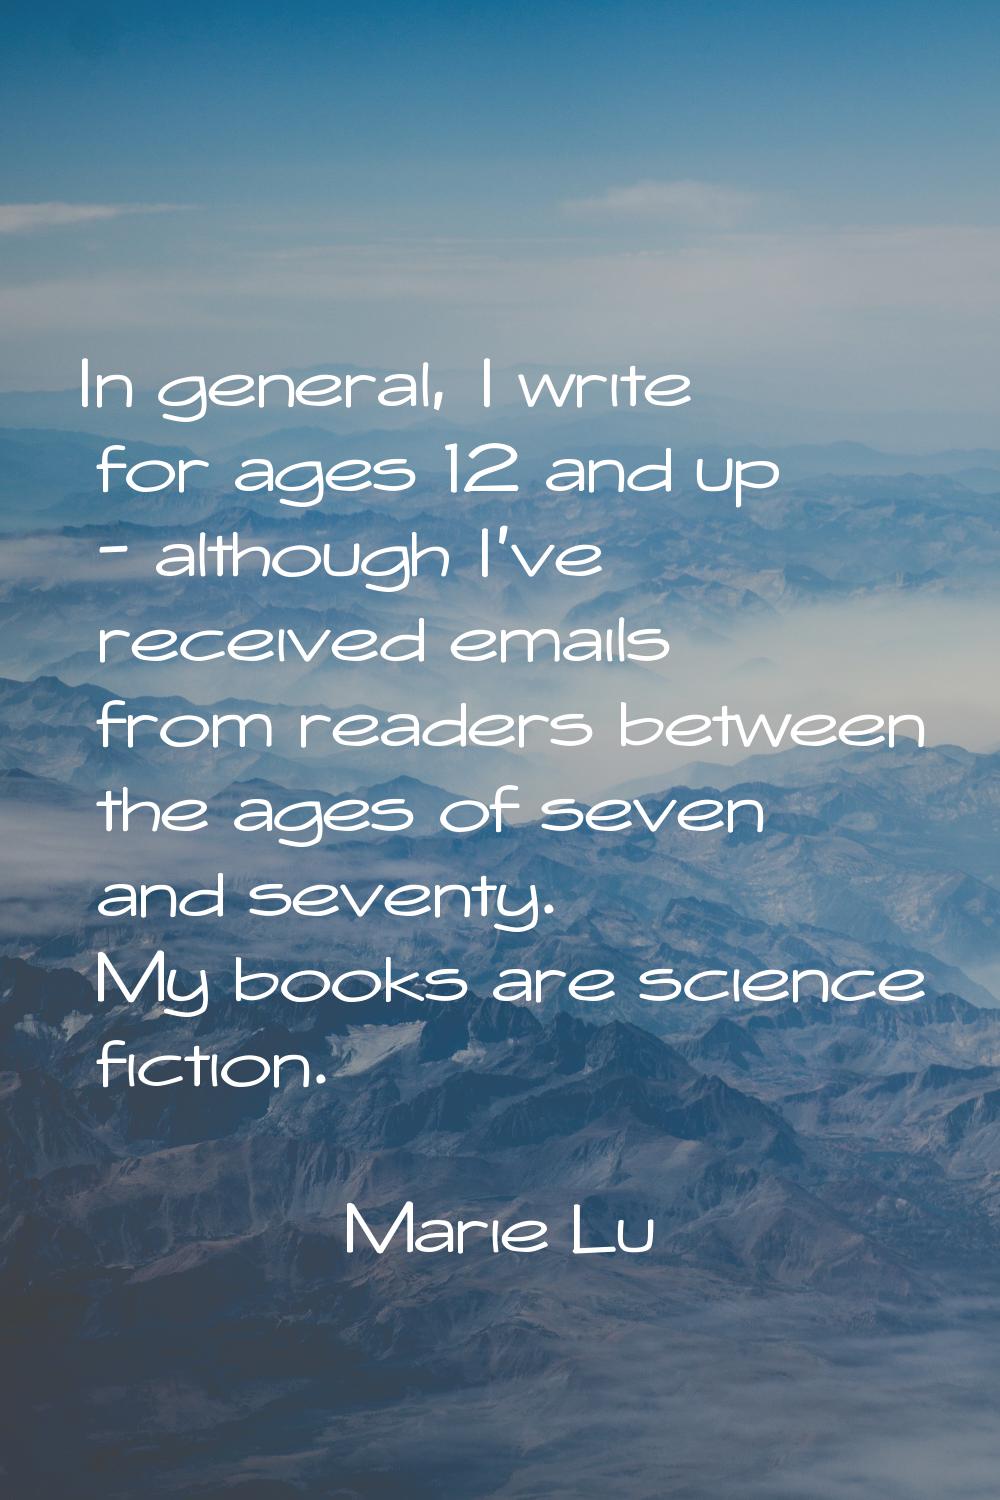 In general, I write for ages 12 and up - although I've received emails from readers between the age